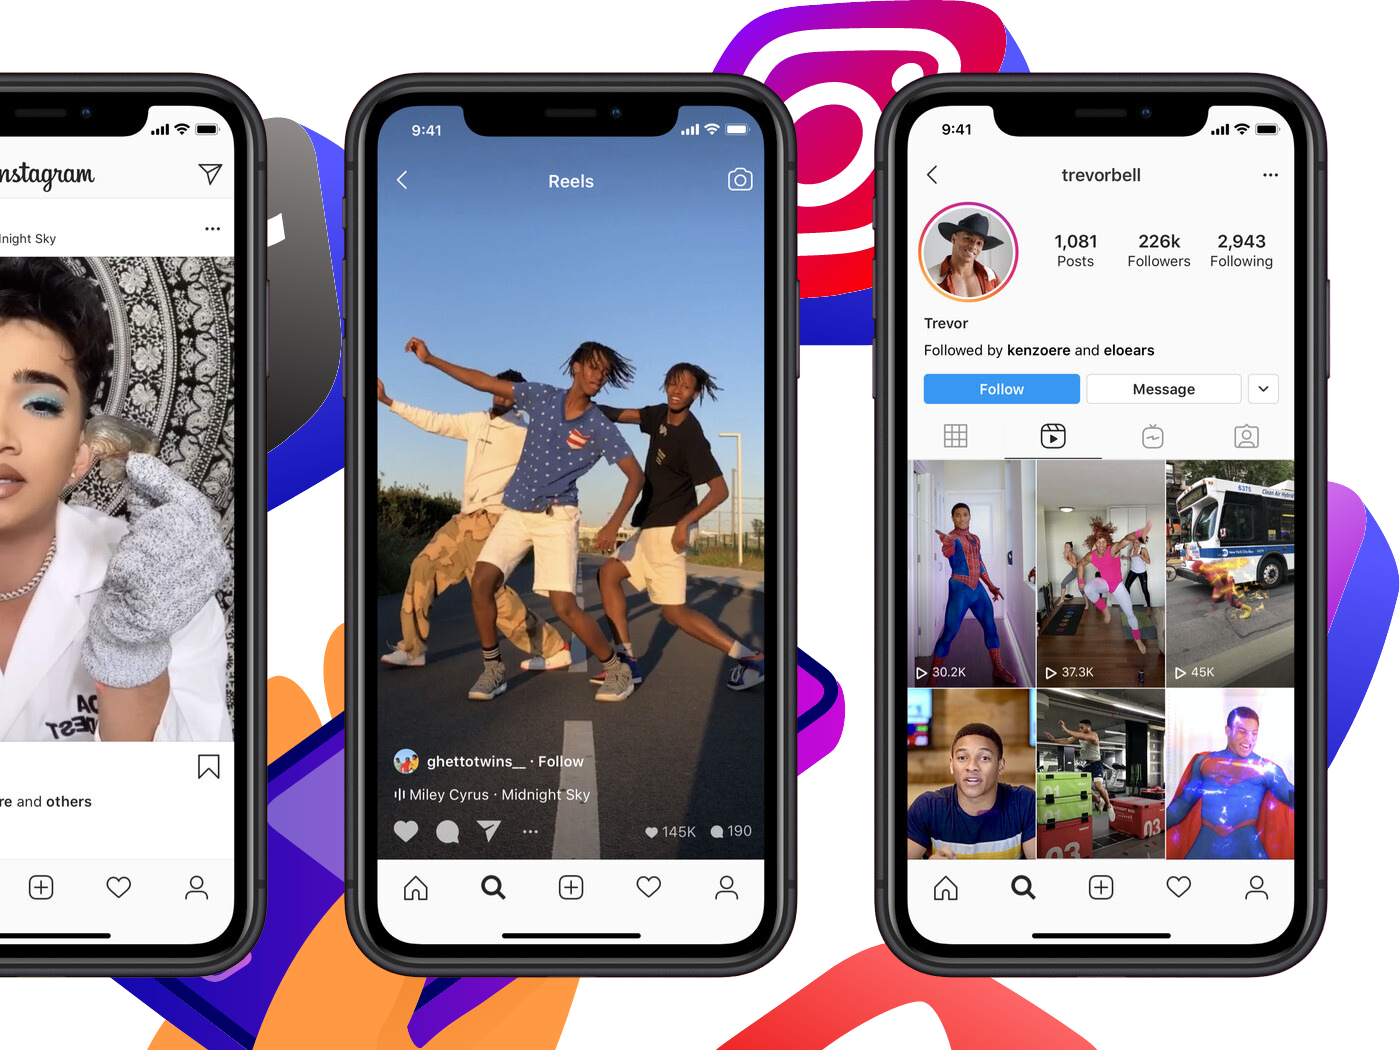 All app developers can now use Instagram’s Sharing to Reels feature